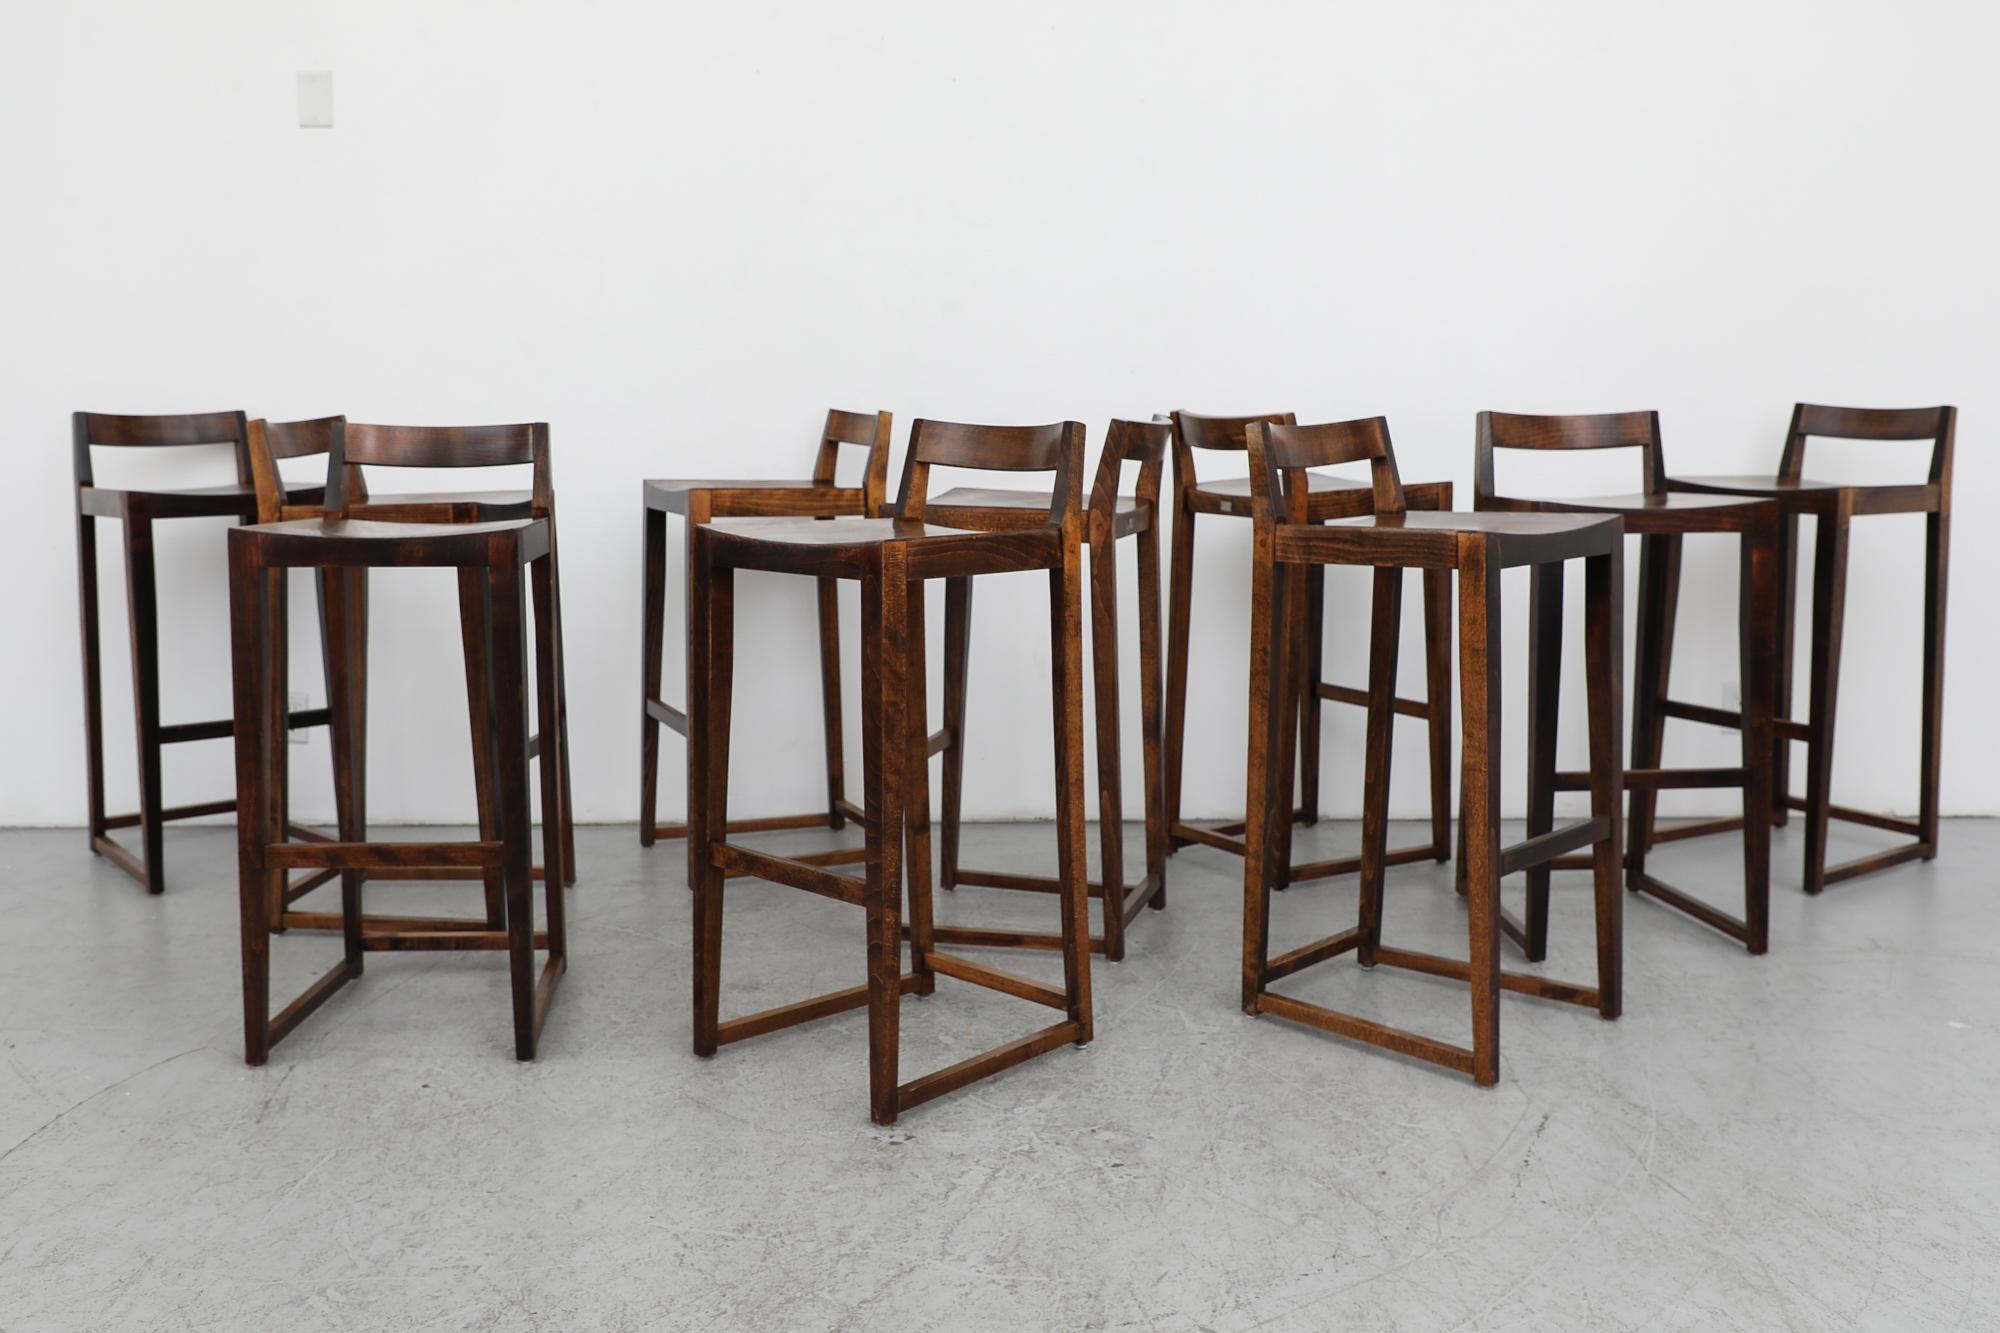 Extra tall modernist bar stool with dark walnut stain. These stools have a short backrest and elongated legs with a helpful footrest, that is 13.375” off the ground. In original condition with normal wear consistent with their age and use. Sold and